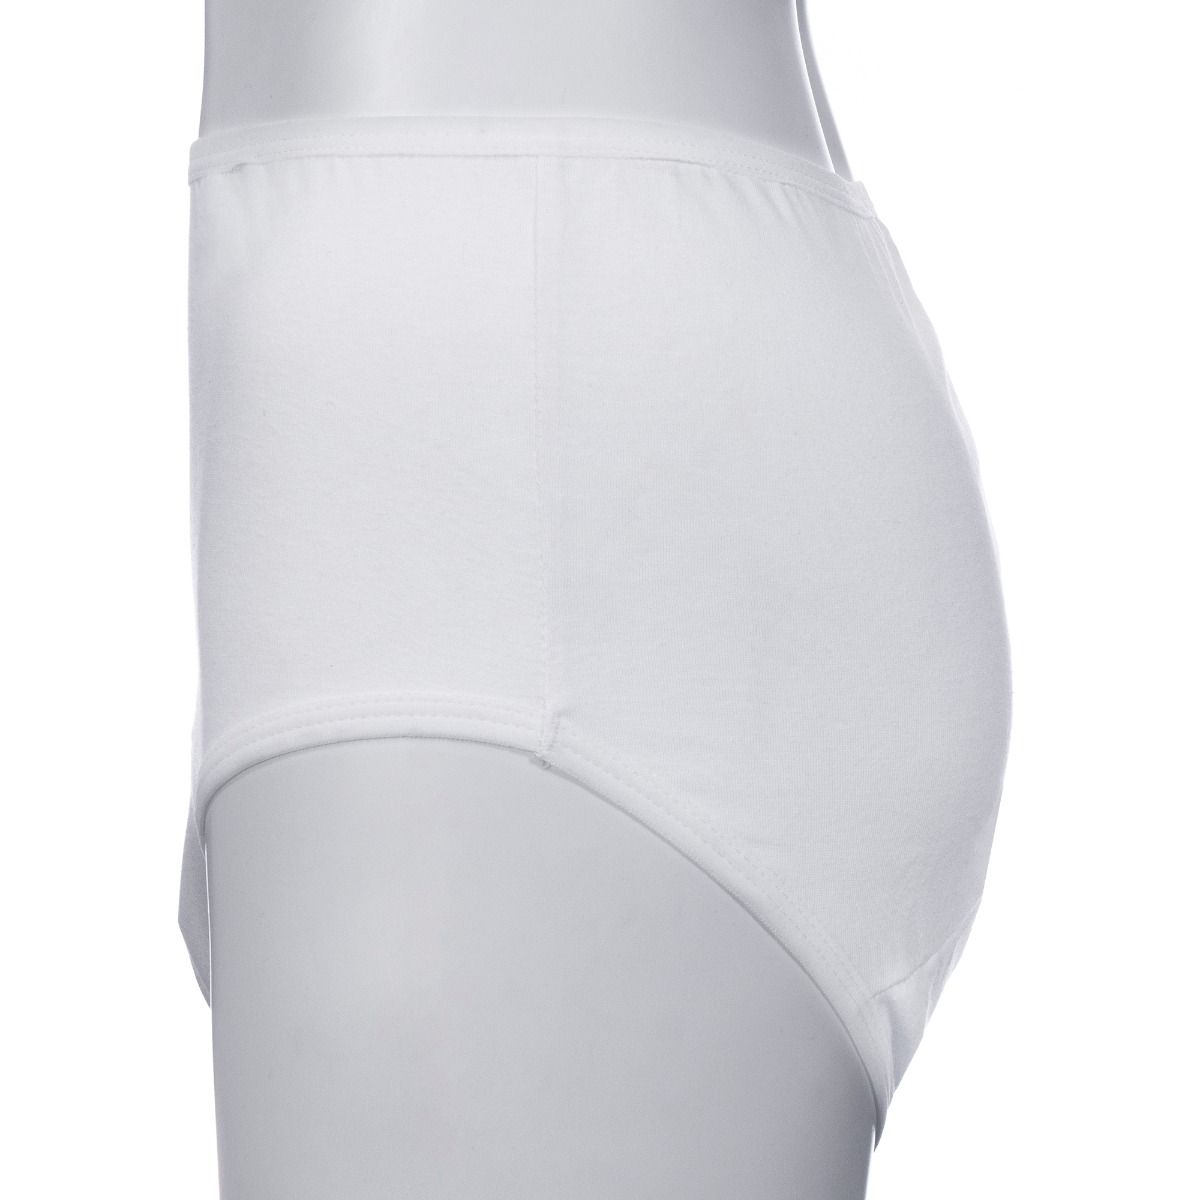 Women's High Waisted Brief White (280ml) Small | Age Co Incontinence ...